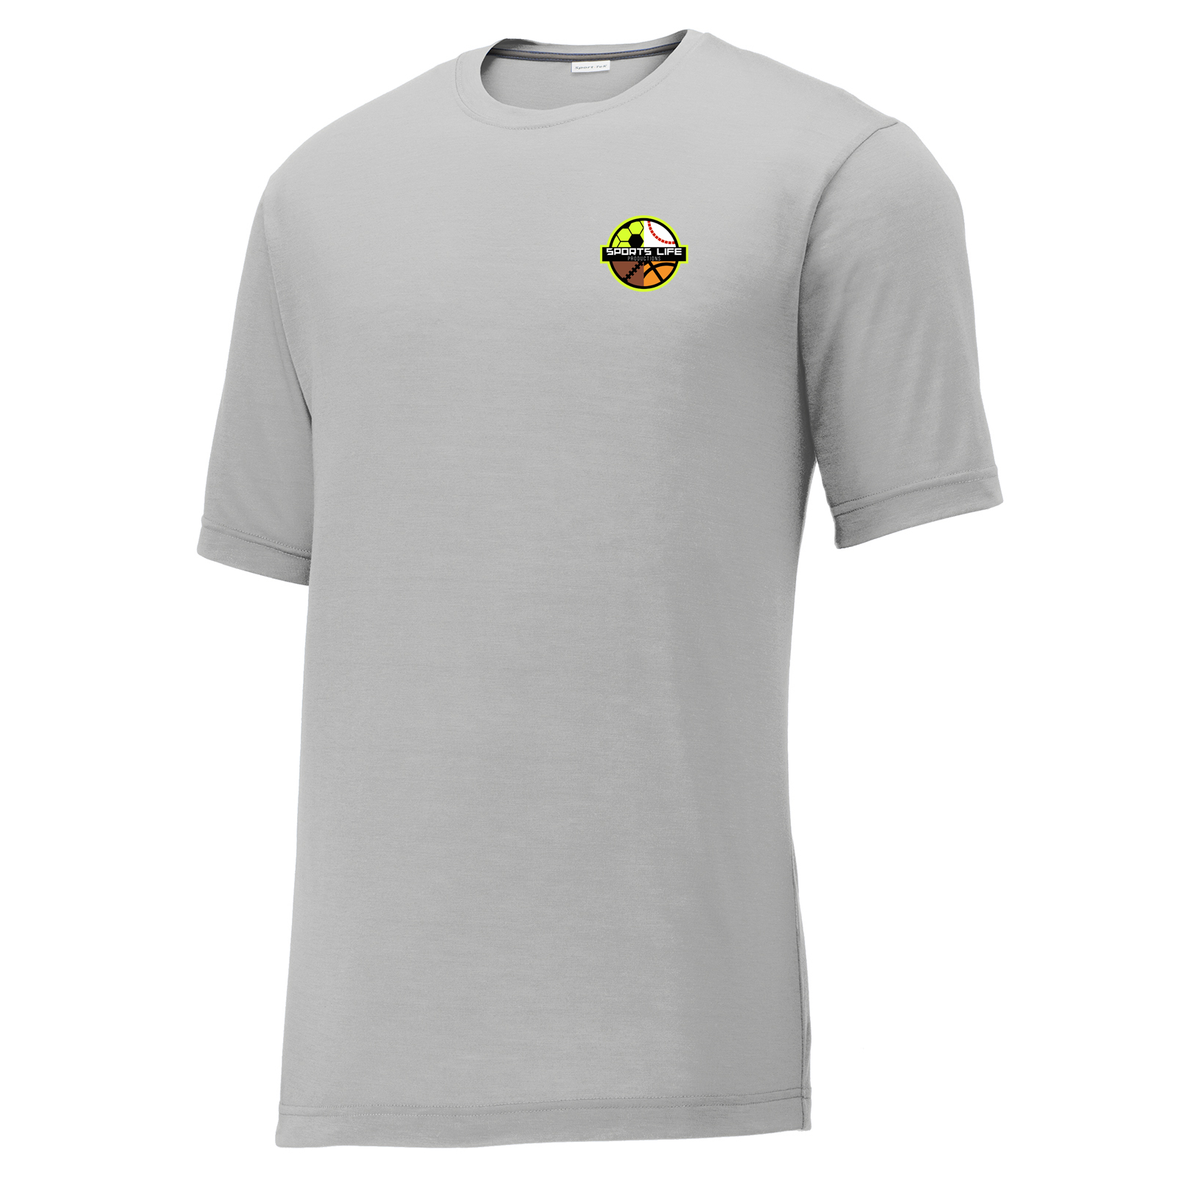 Sports Life Productions CottonTouch Performance T-Shirt